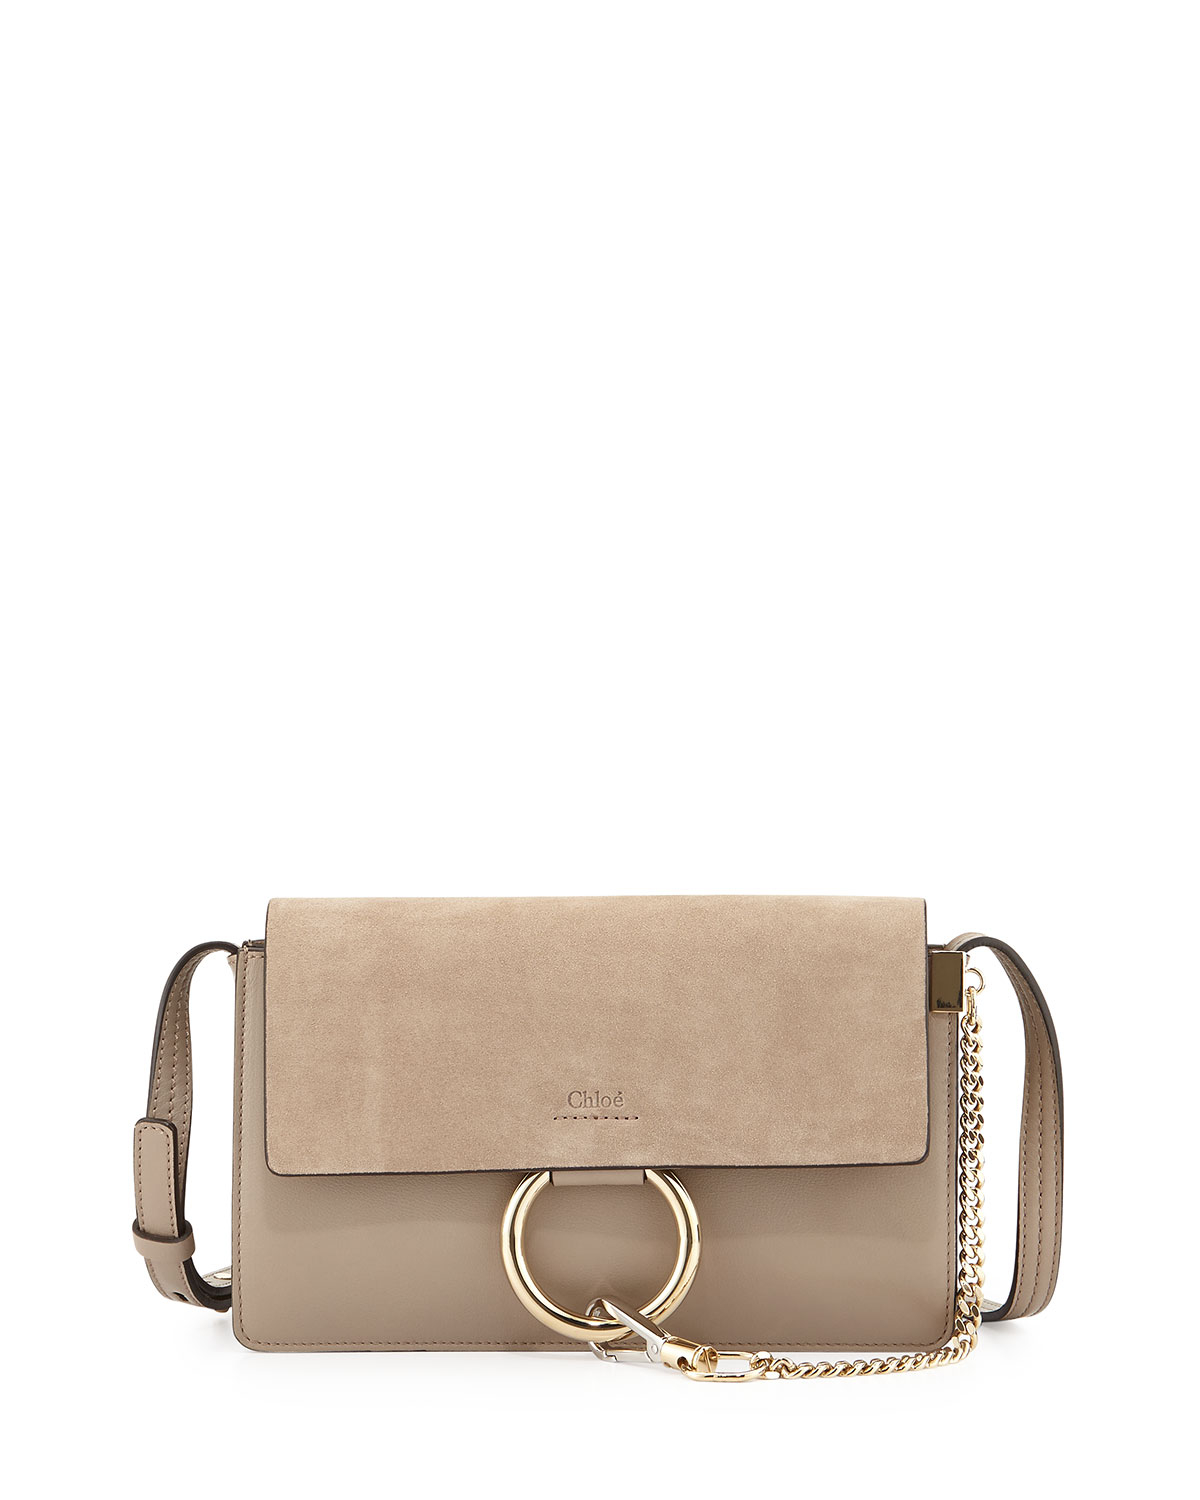 Chloé Faye Small Suede Shoulder Bag in Gray | Lyst